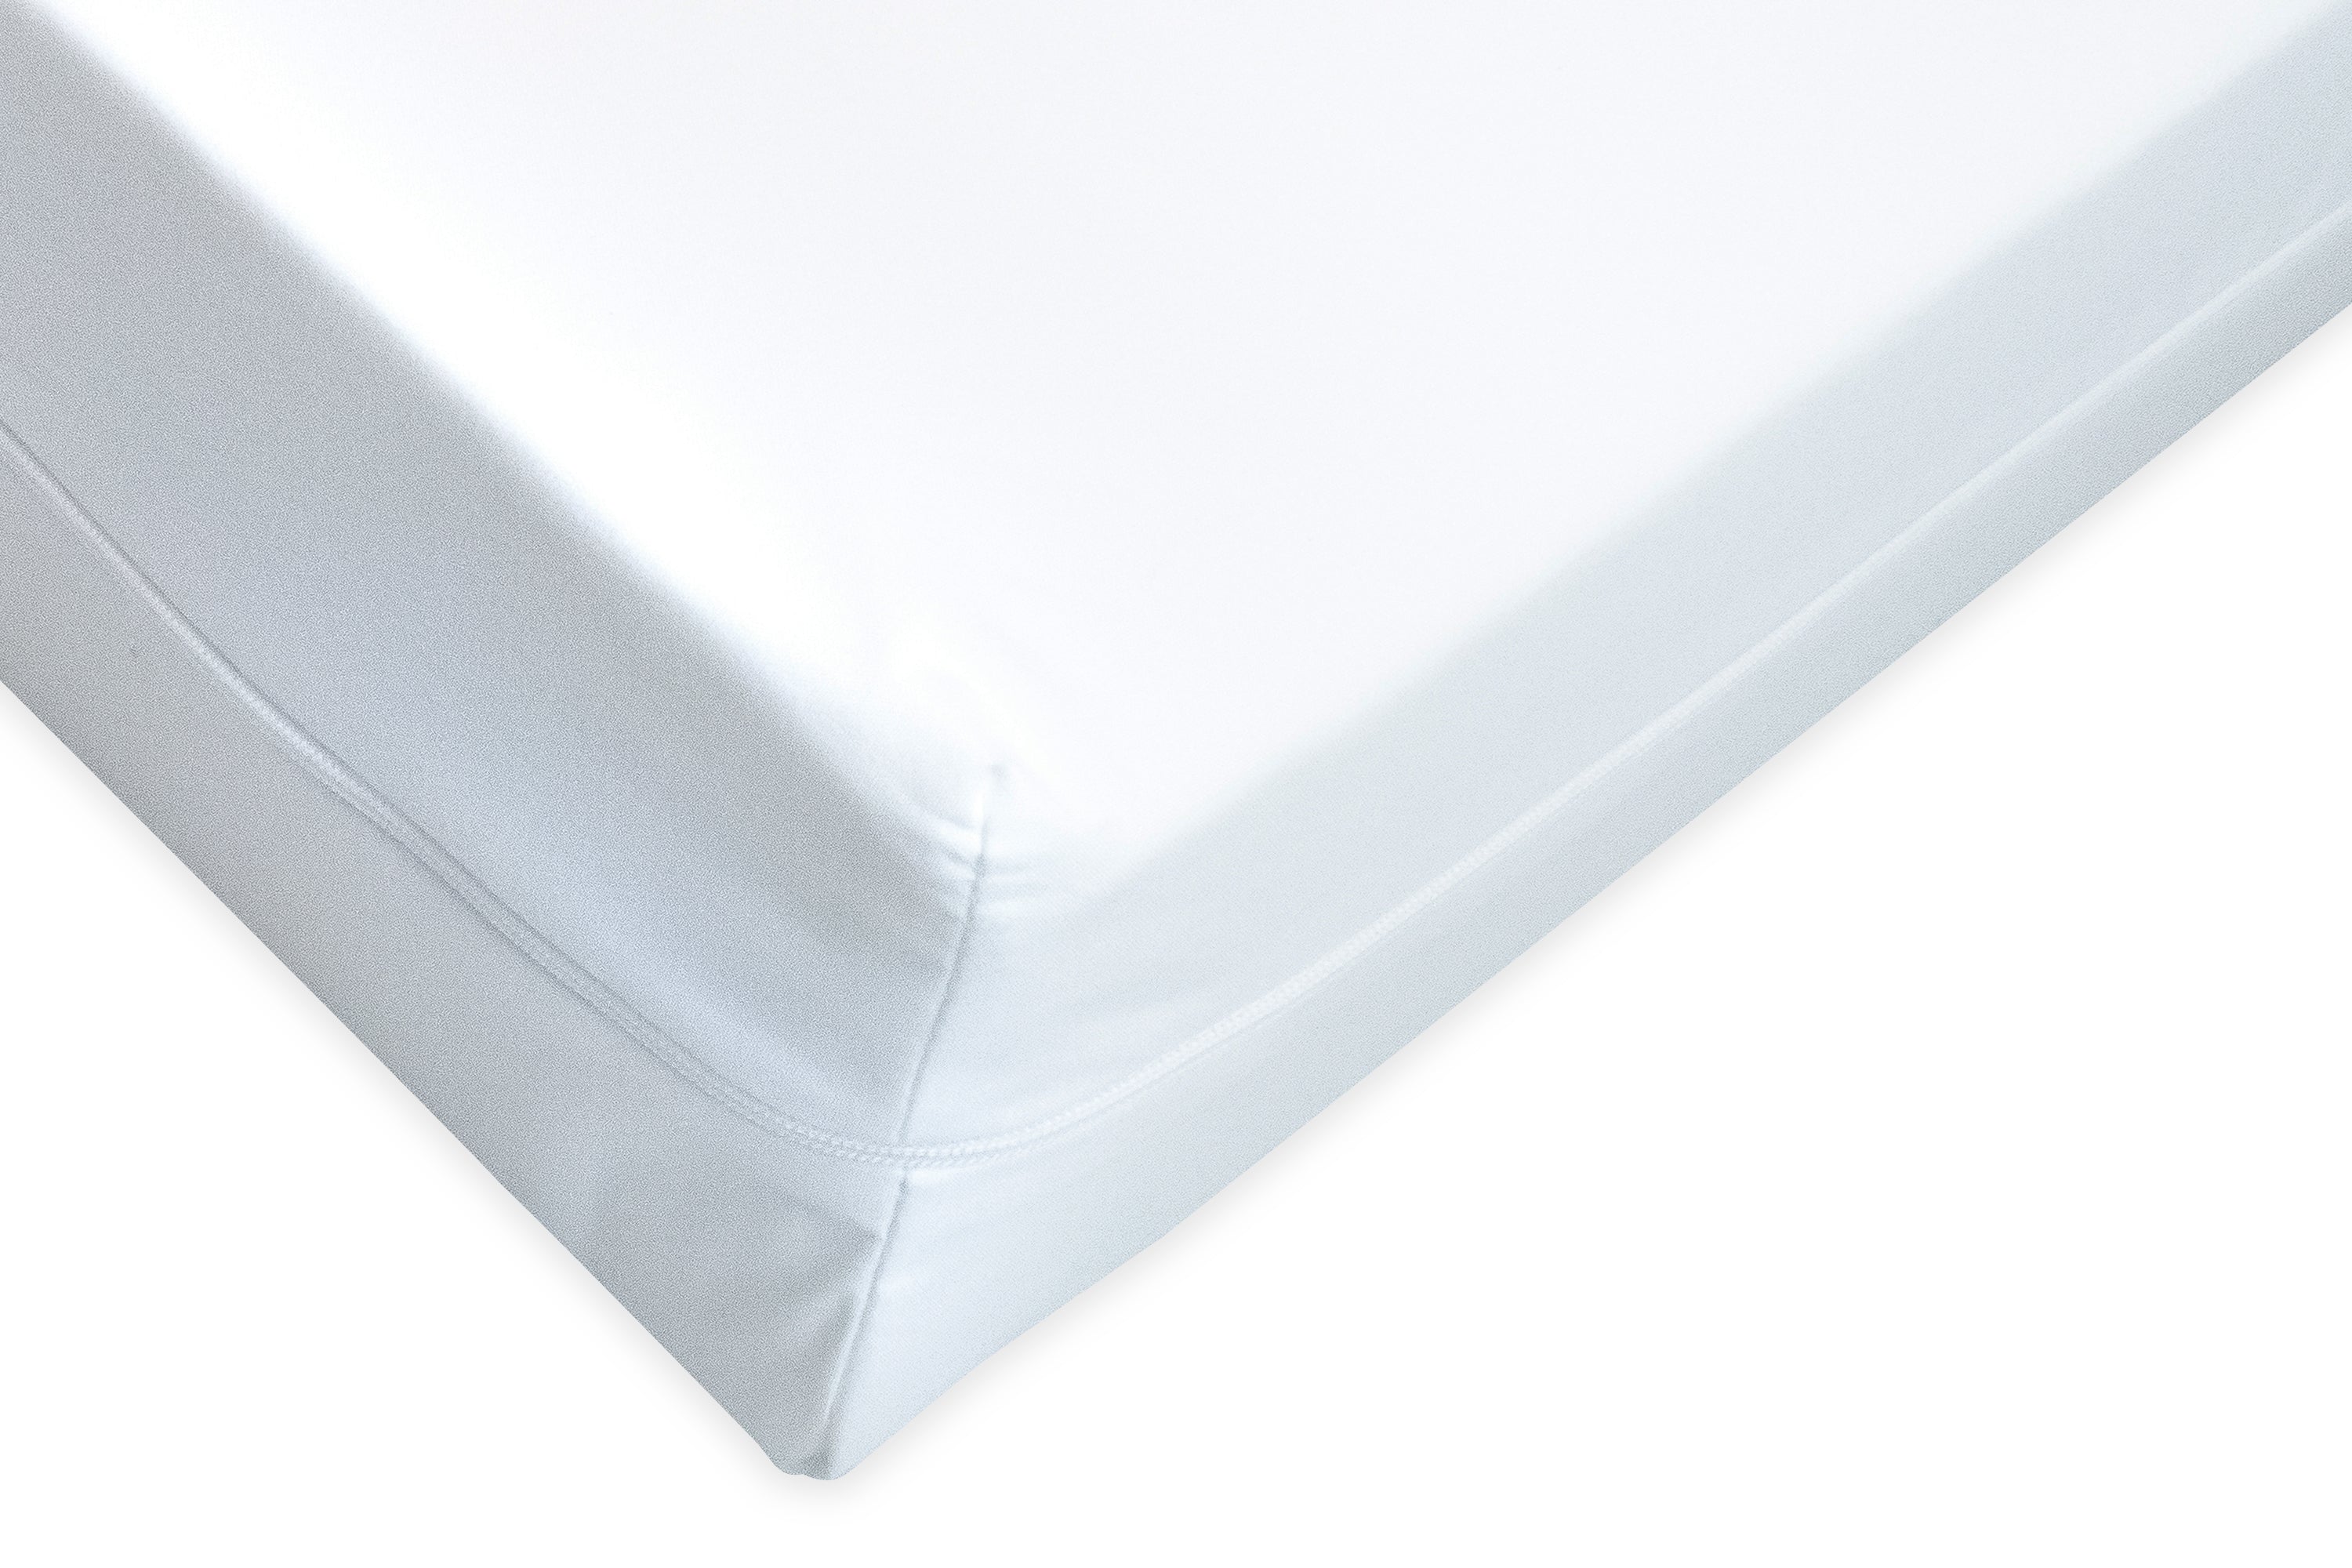 zip feature of hatchling tamago mattress cover